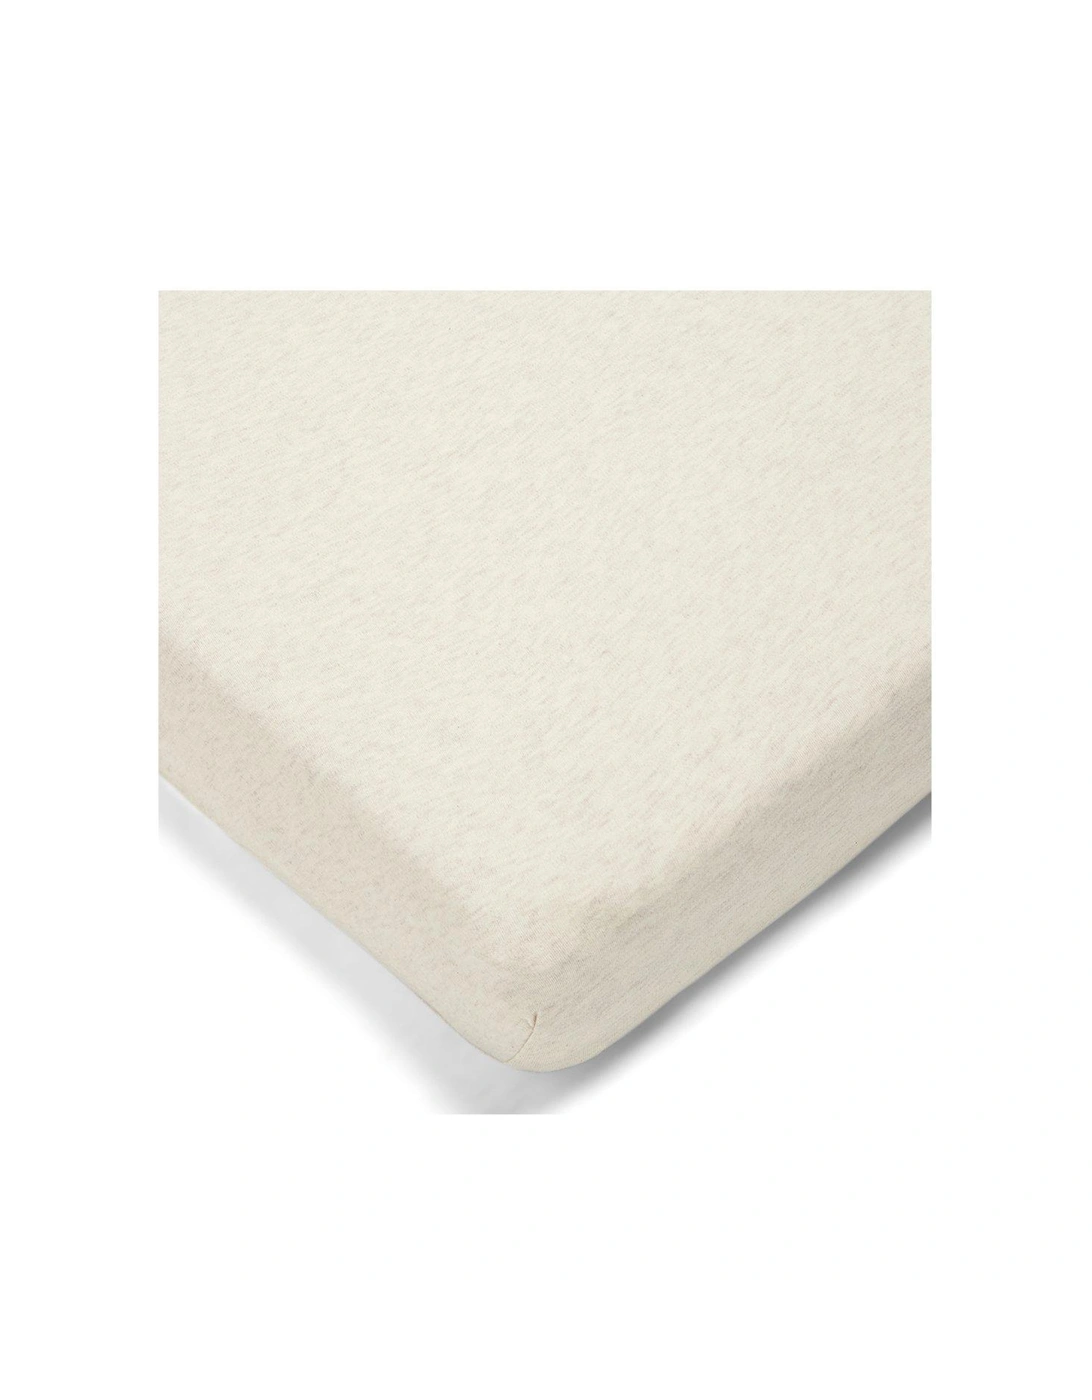 Cot/Bed Fitted Sheet - Oatmeal Marl, 2 of 1